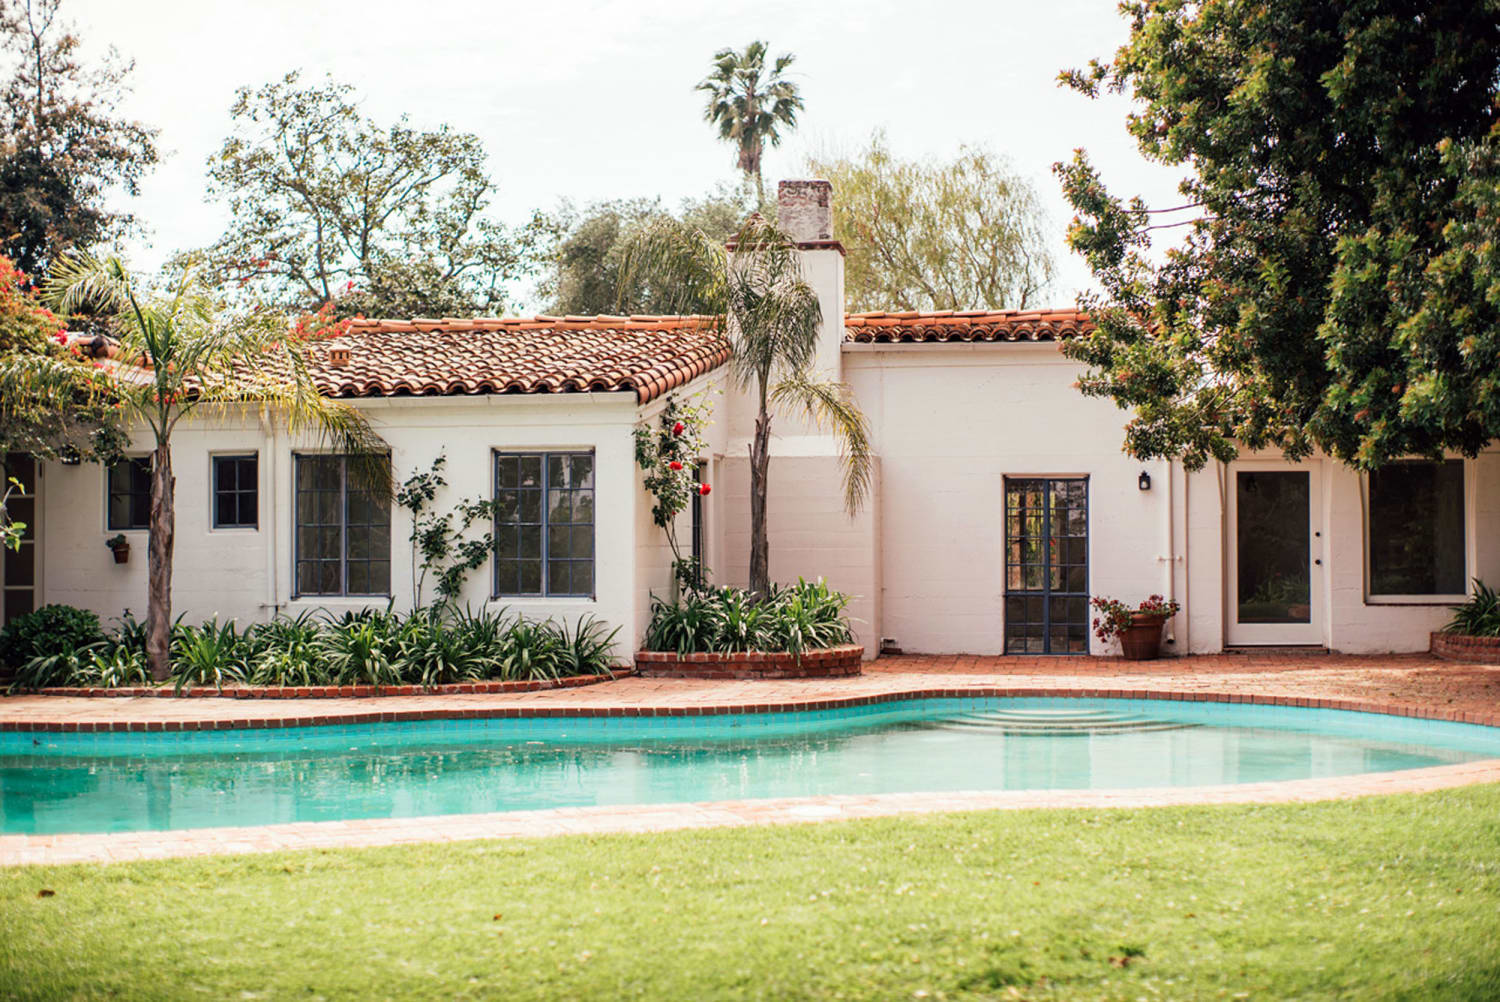 Marilyn Monroe's home in Brentwood, Los Angeles, sold